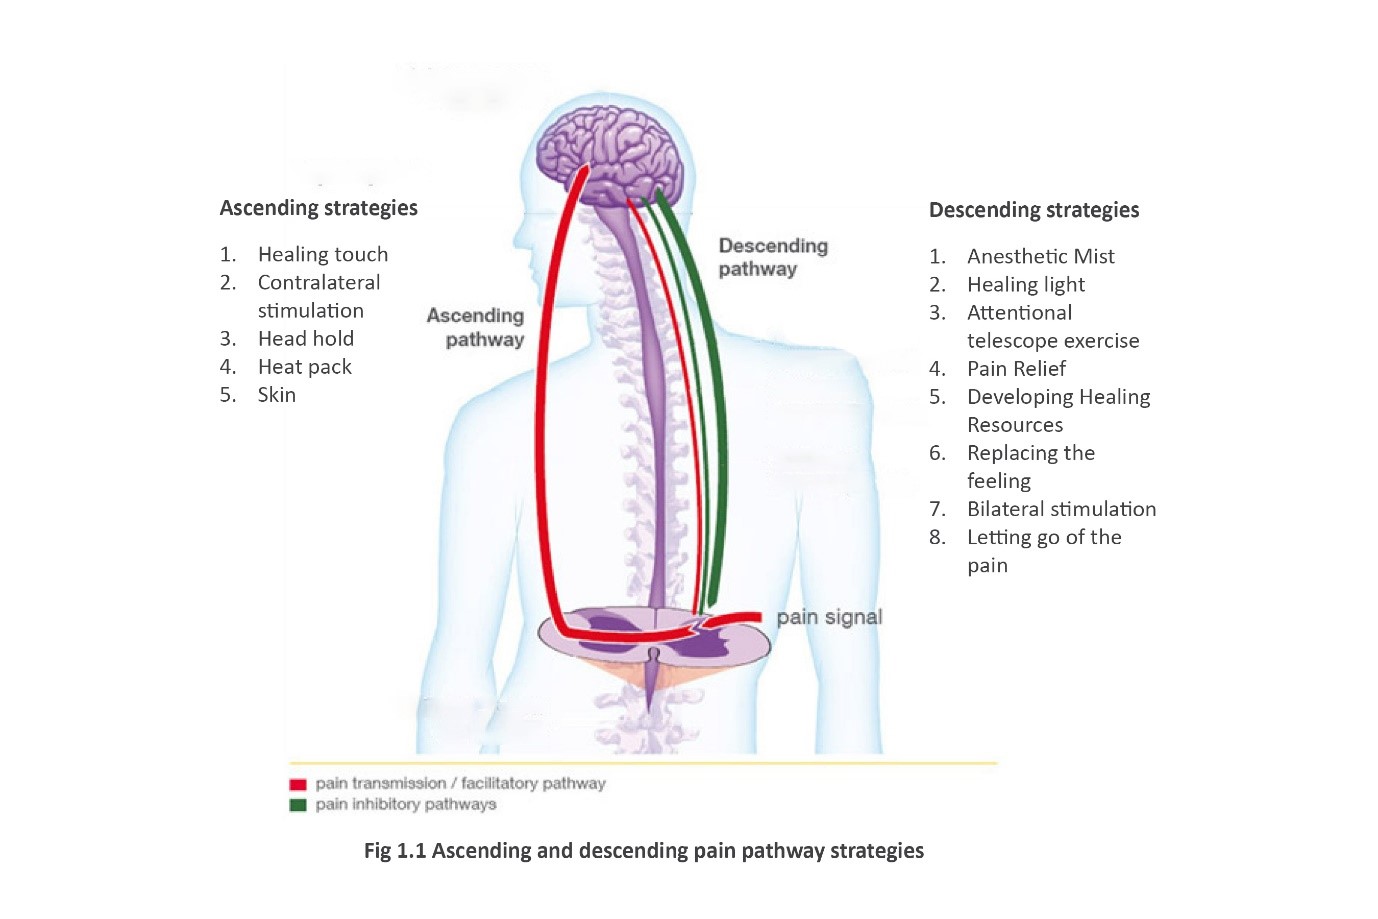 Ascending and decesding pain pathway strategies 